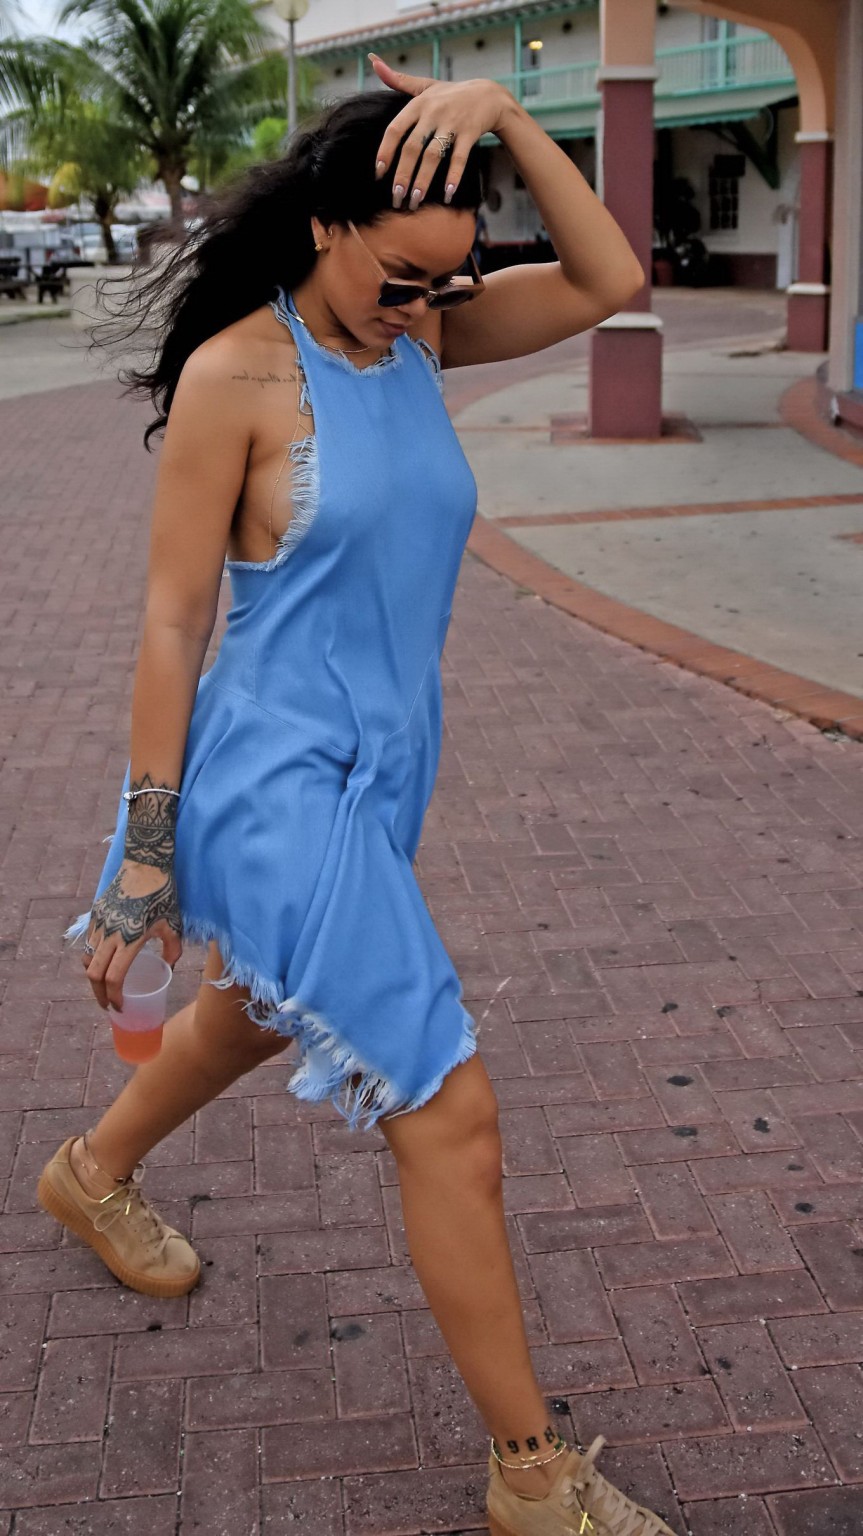 Rihanna showing sideboob and pokies in tiny blue dress #75148342